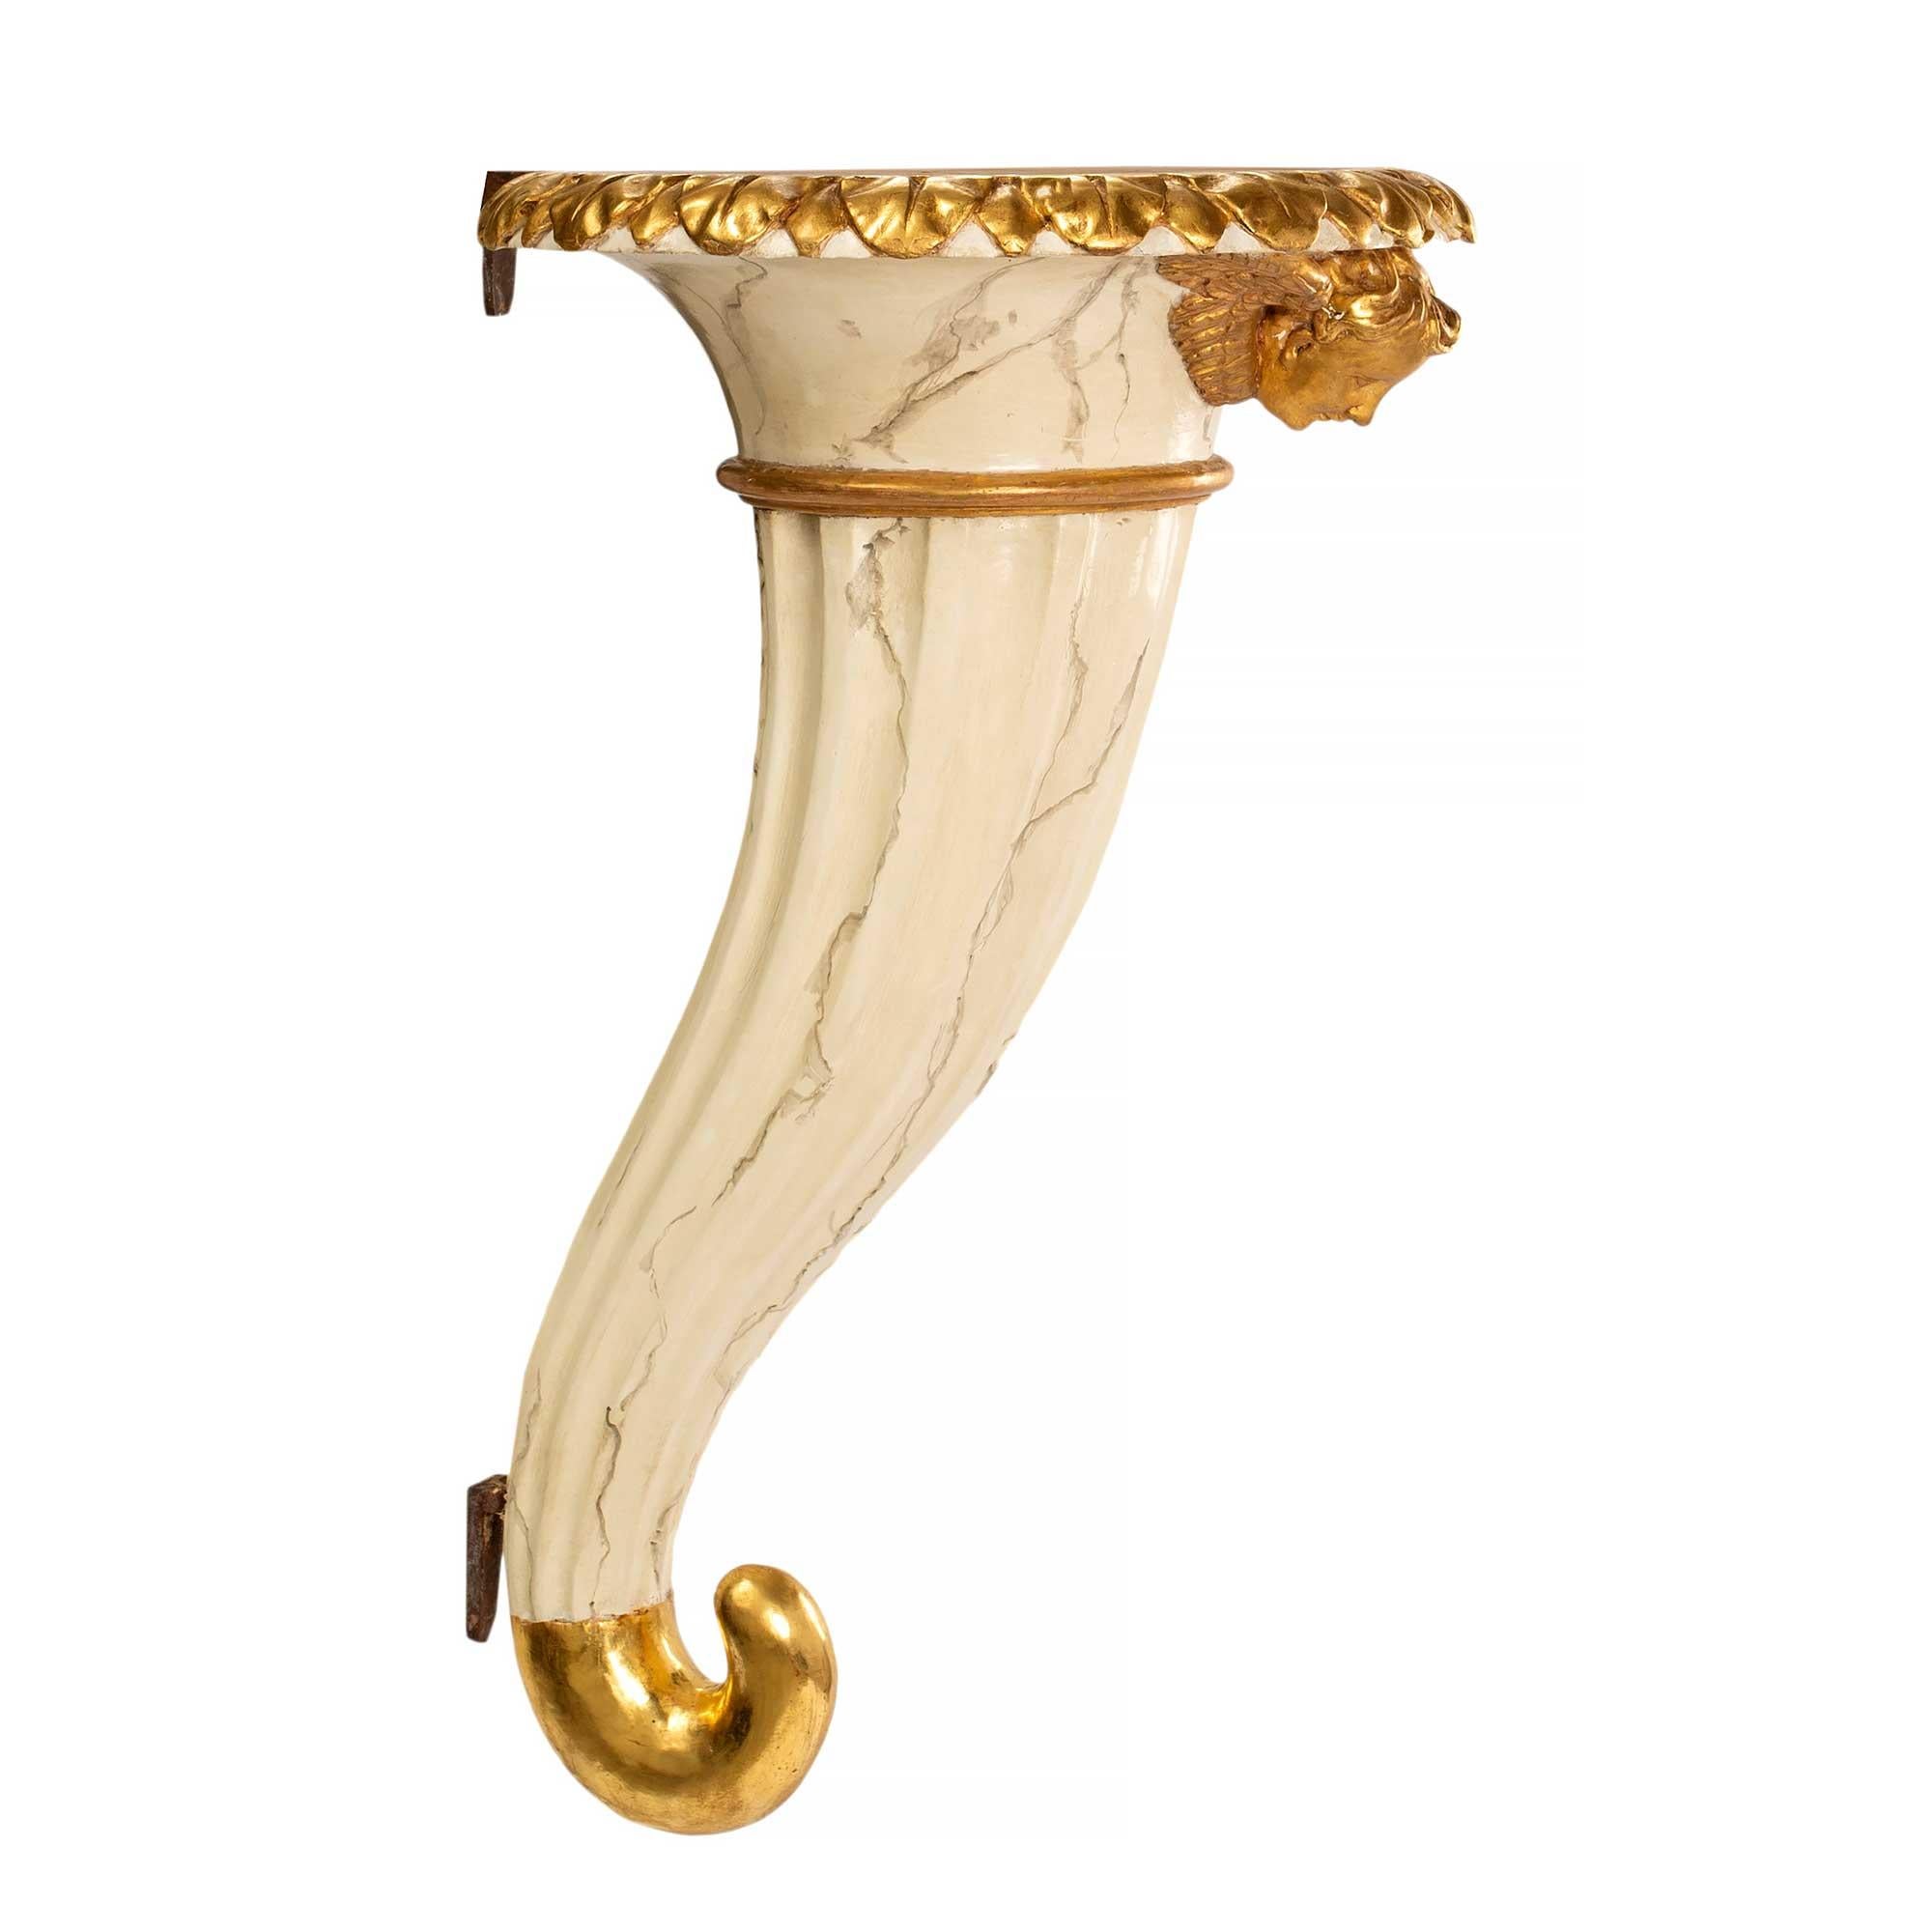 A sensation and unique pair of Italian mid 18th century Venetian faux marble and giltwood wall brackets. The pair are in the shape of a cornucopia with the bottom swirl in a beautiful burnished gilt finish. The center has a wonderful faux white